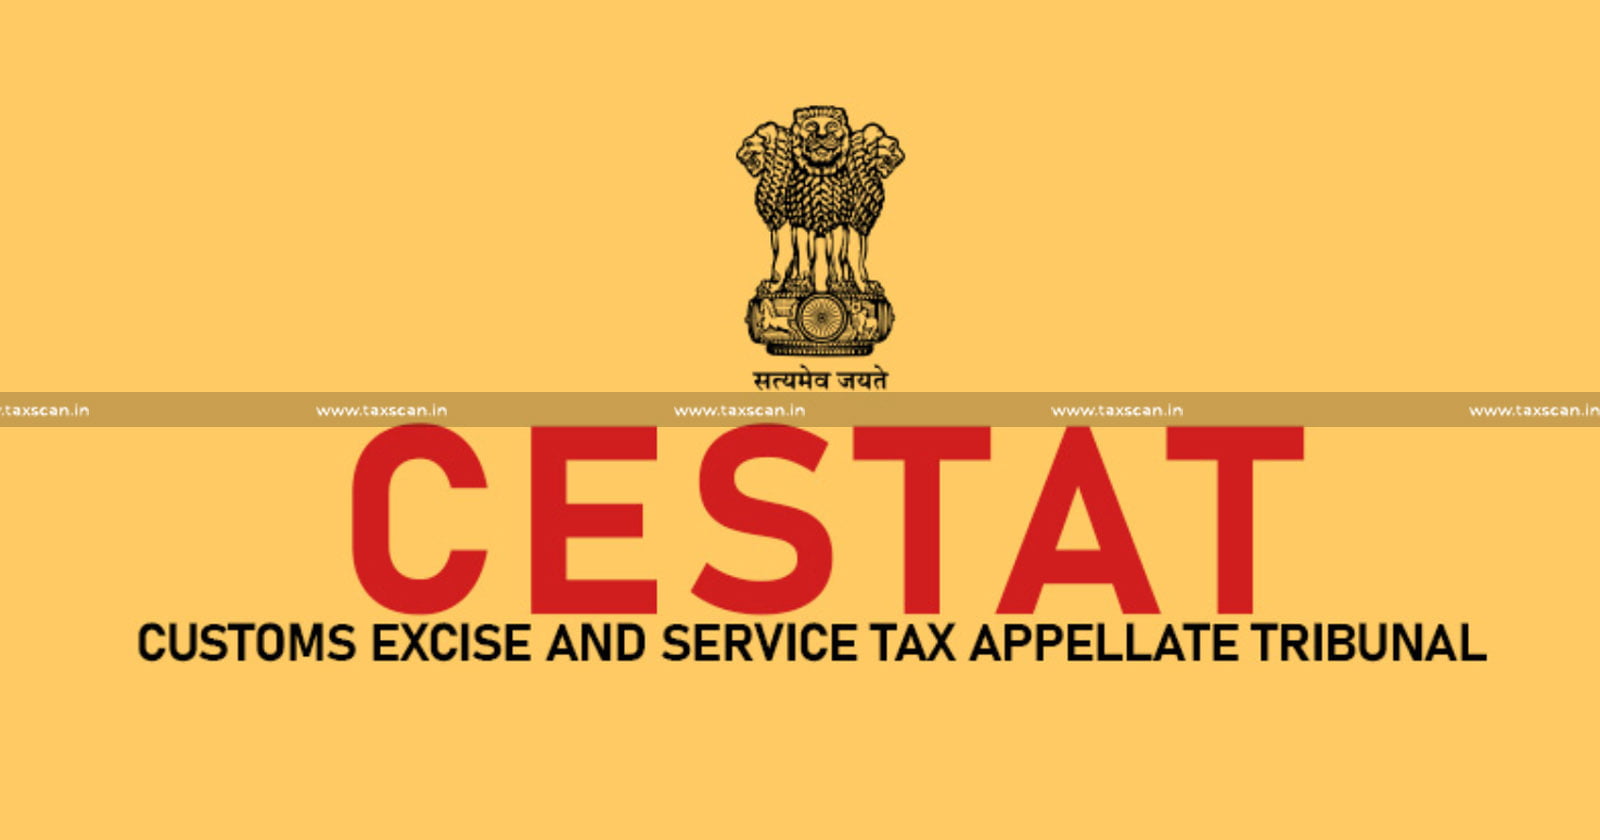 CESTAT - not competent to condone Delay - filing of Appeal before First Appellate Authority - First Appellate Authority - filing of Appeal - CESTAT Dismisses Appeal - CESTAT News - Excise - Customs - Service Tax - TAXSCAN